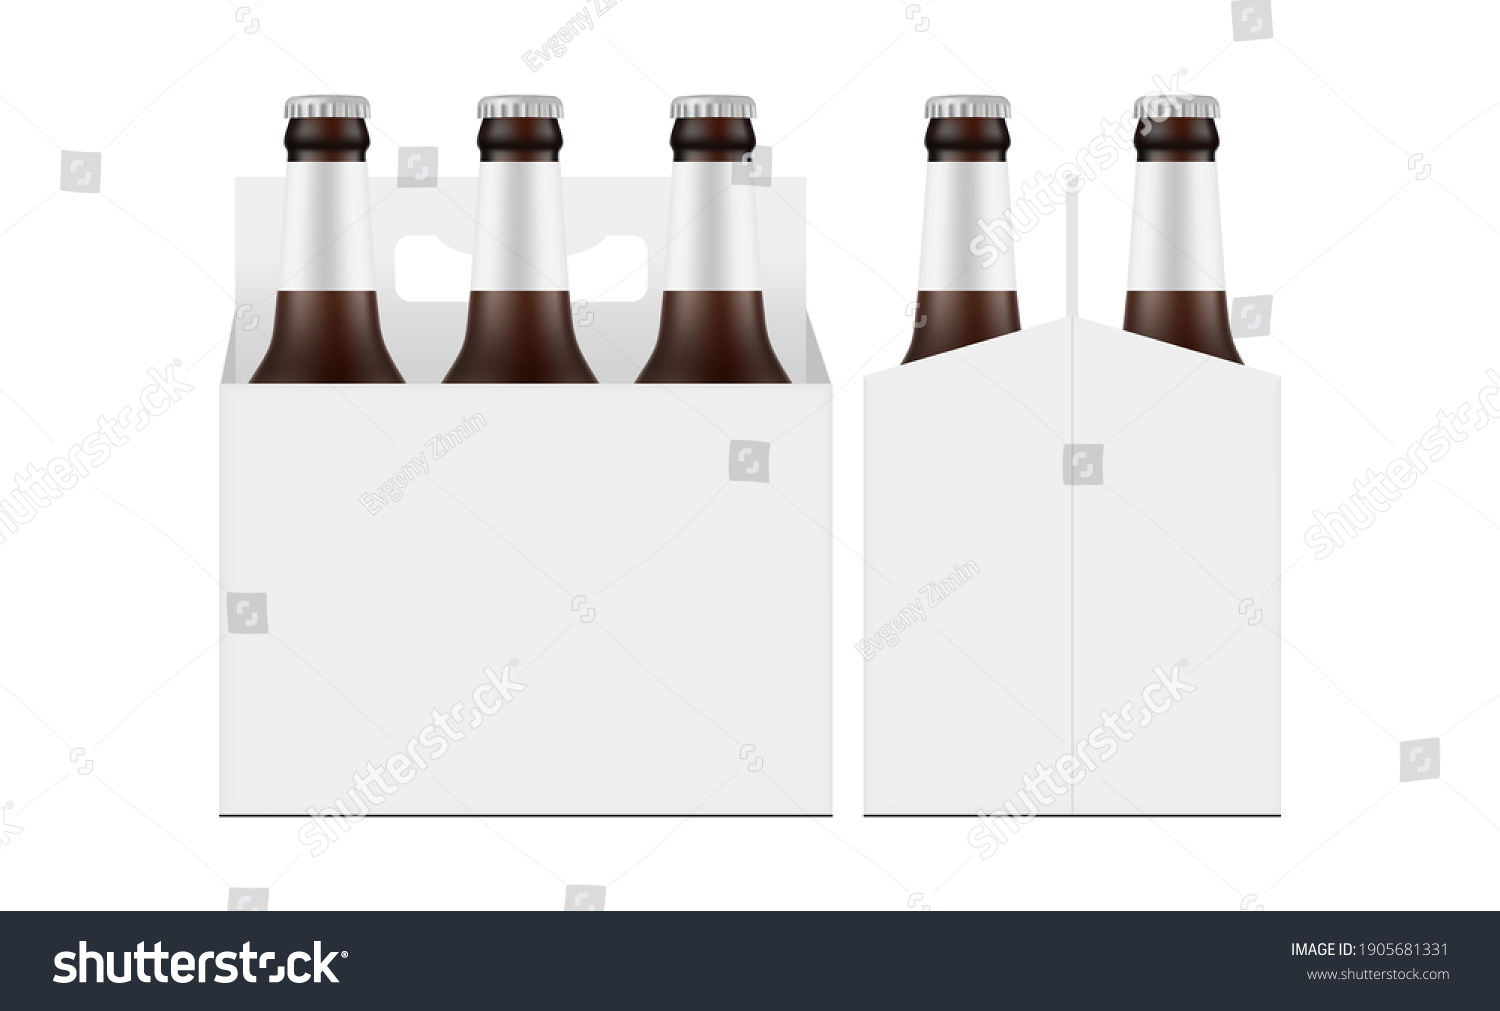 SVG of Carrier Packaging Box Mockup with Brown Glass Beer Bottles, Front and Side View, Isolated on White Background. Vector Illustration svg